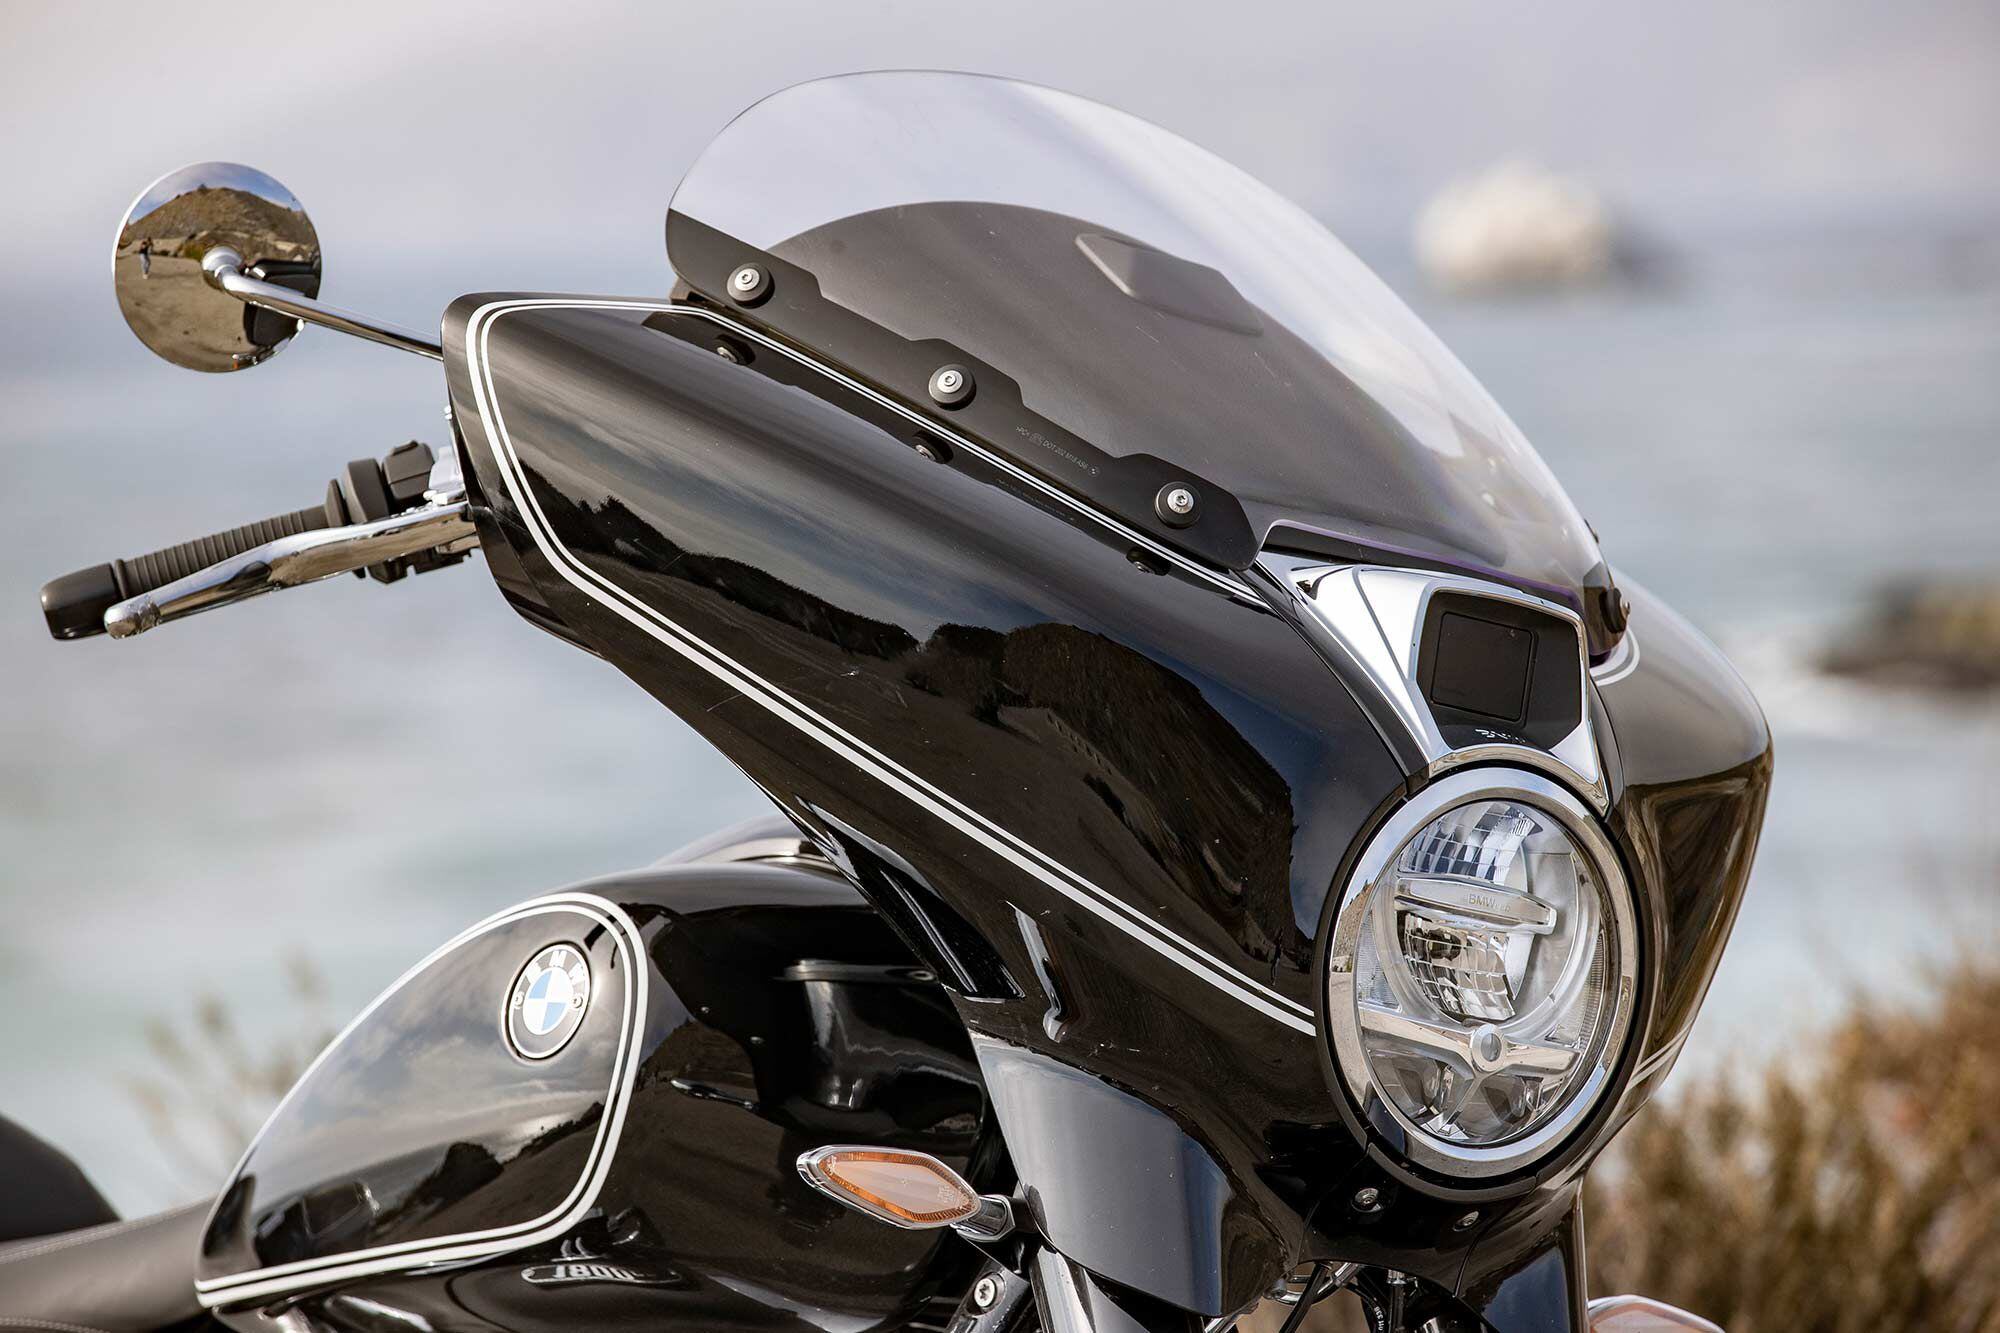 The BMW R 18 B comes with this mid-height windshield, but one taller and one shorter option are also available through BMW.